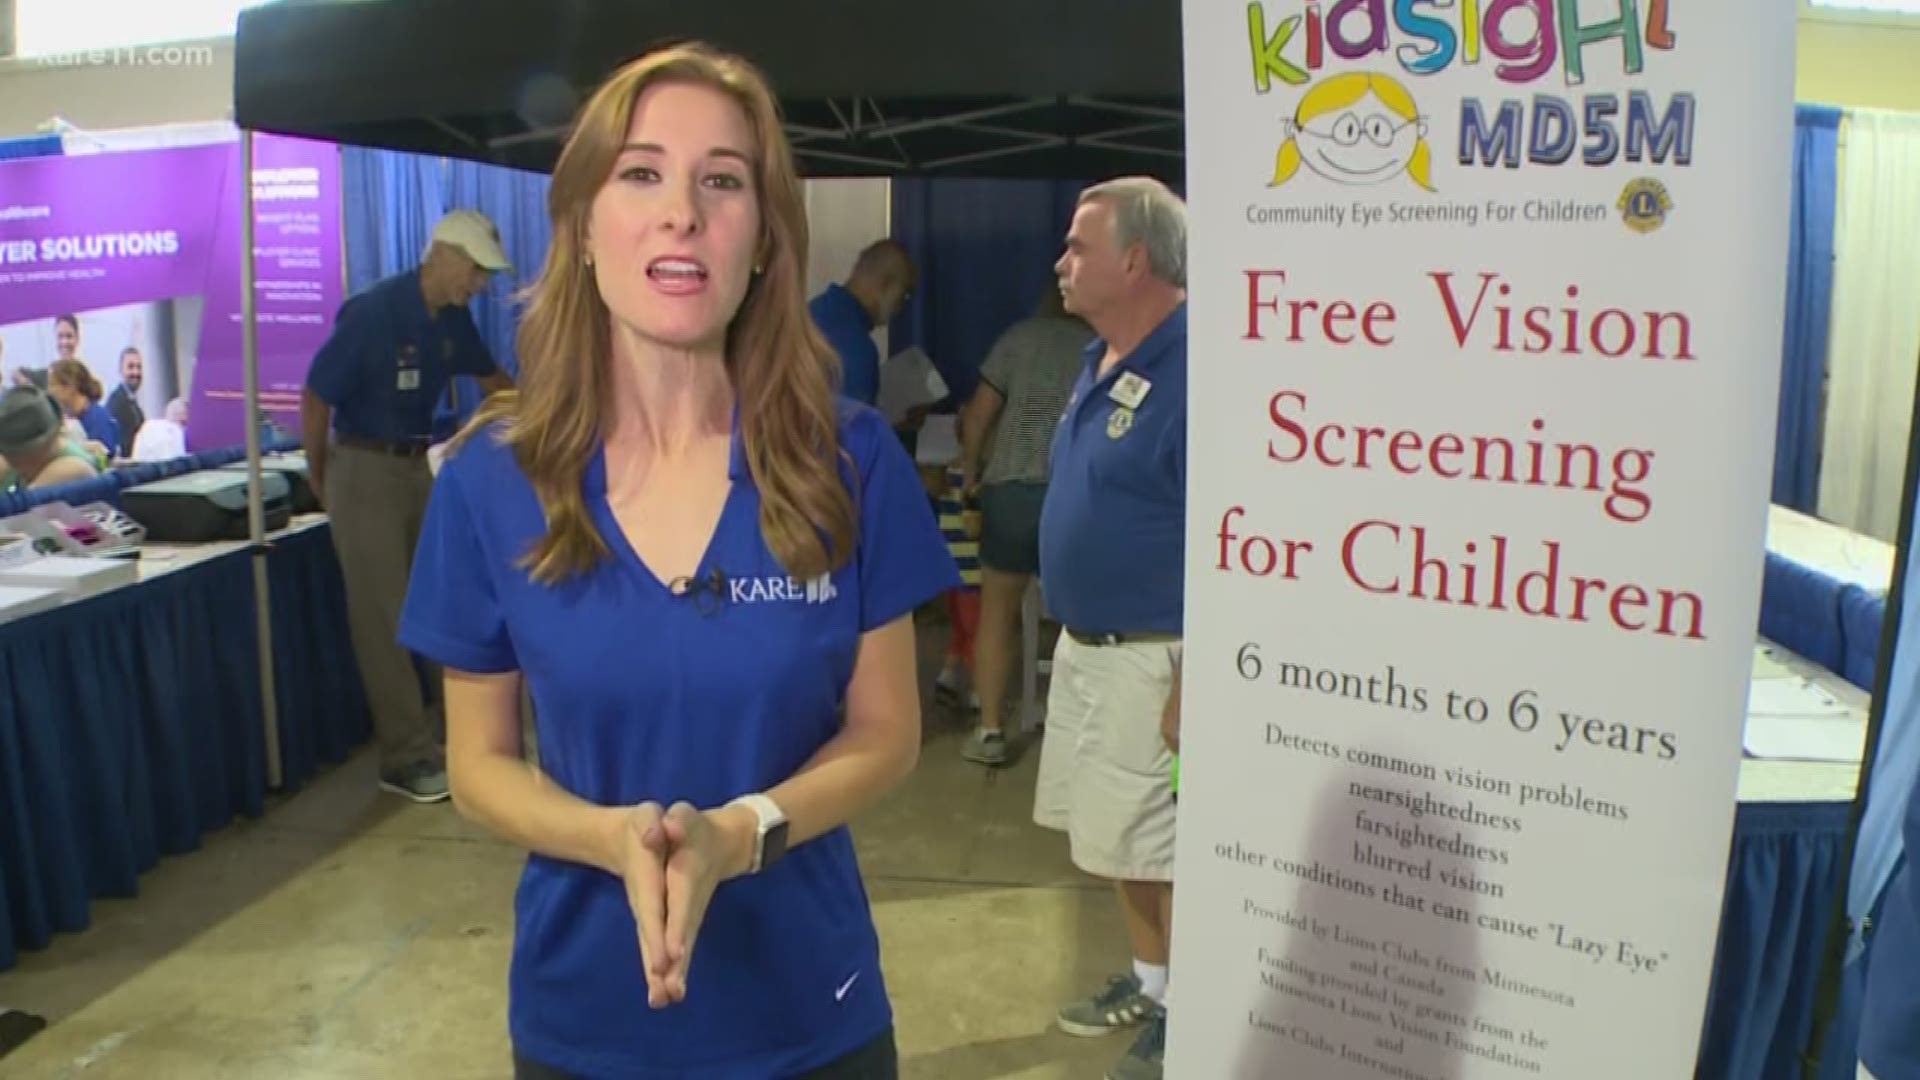 The free screenings cover children who are between the ages of 6 months and 6 years of age.